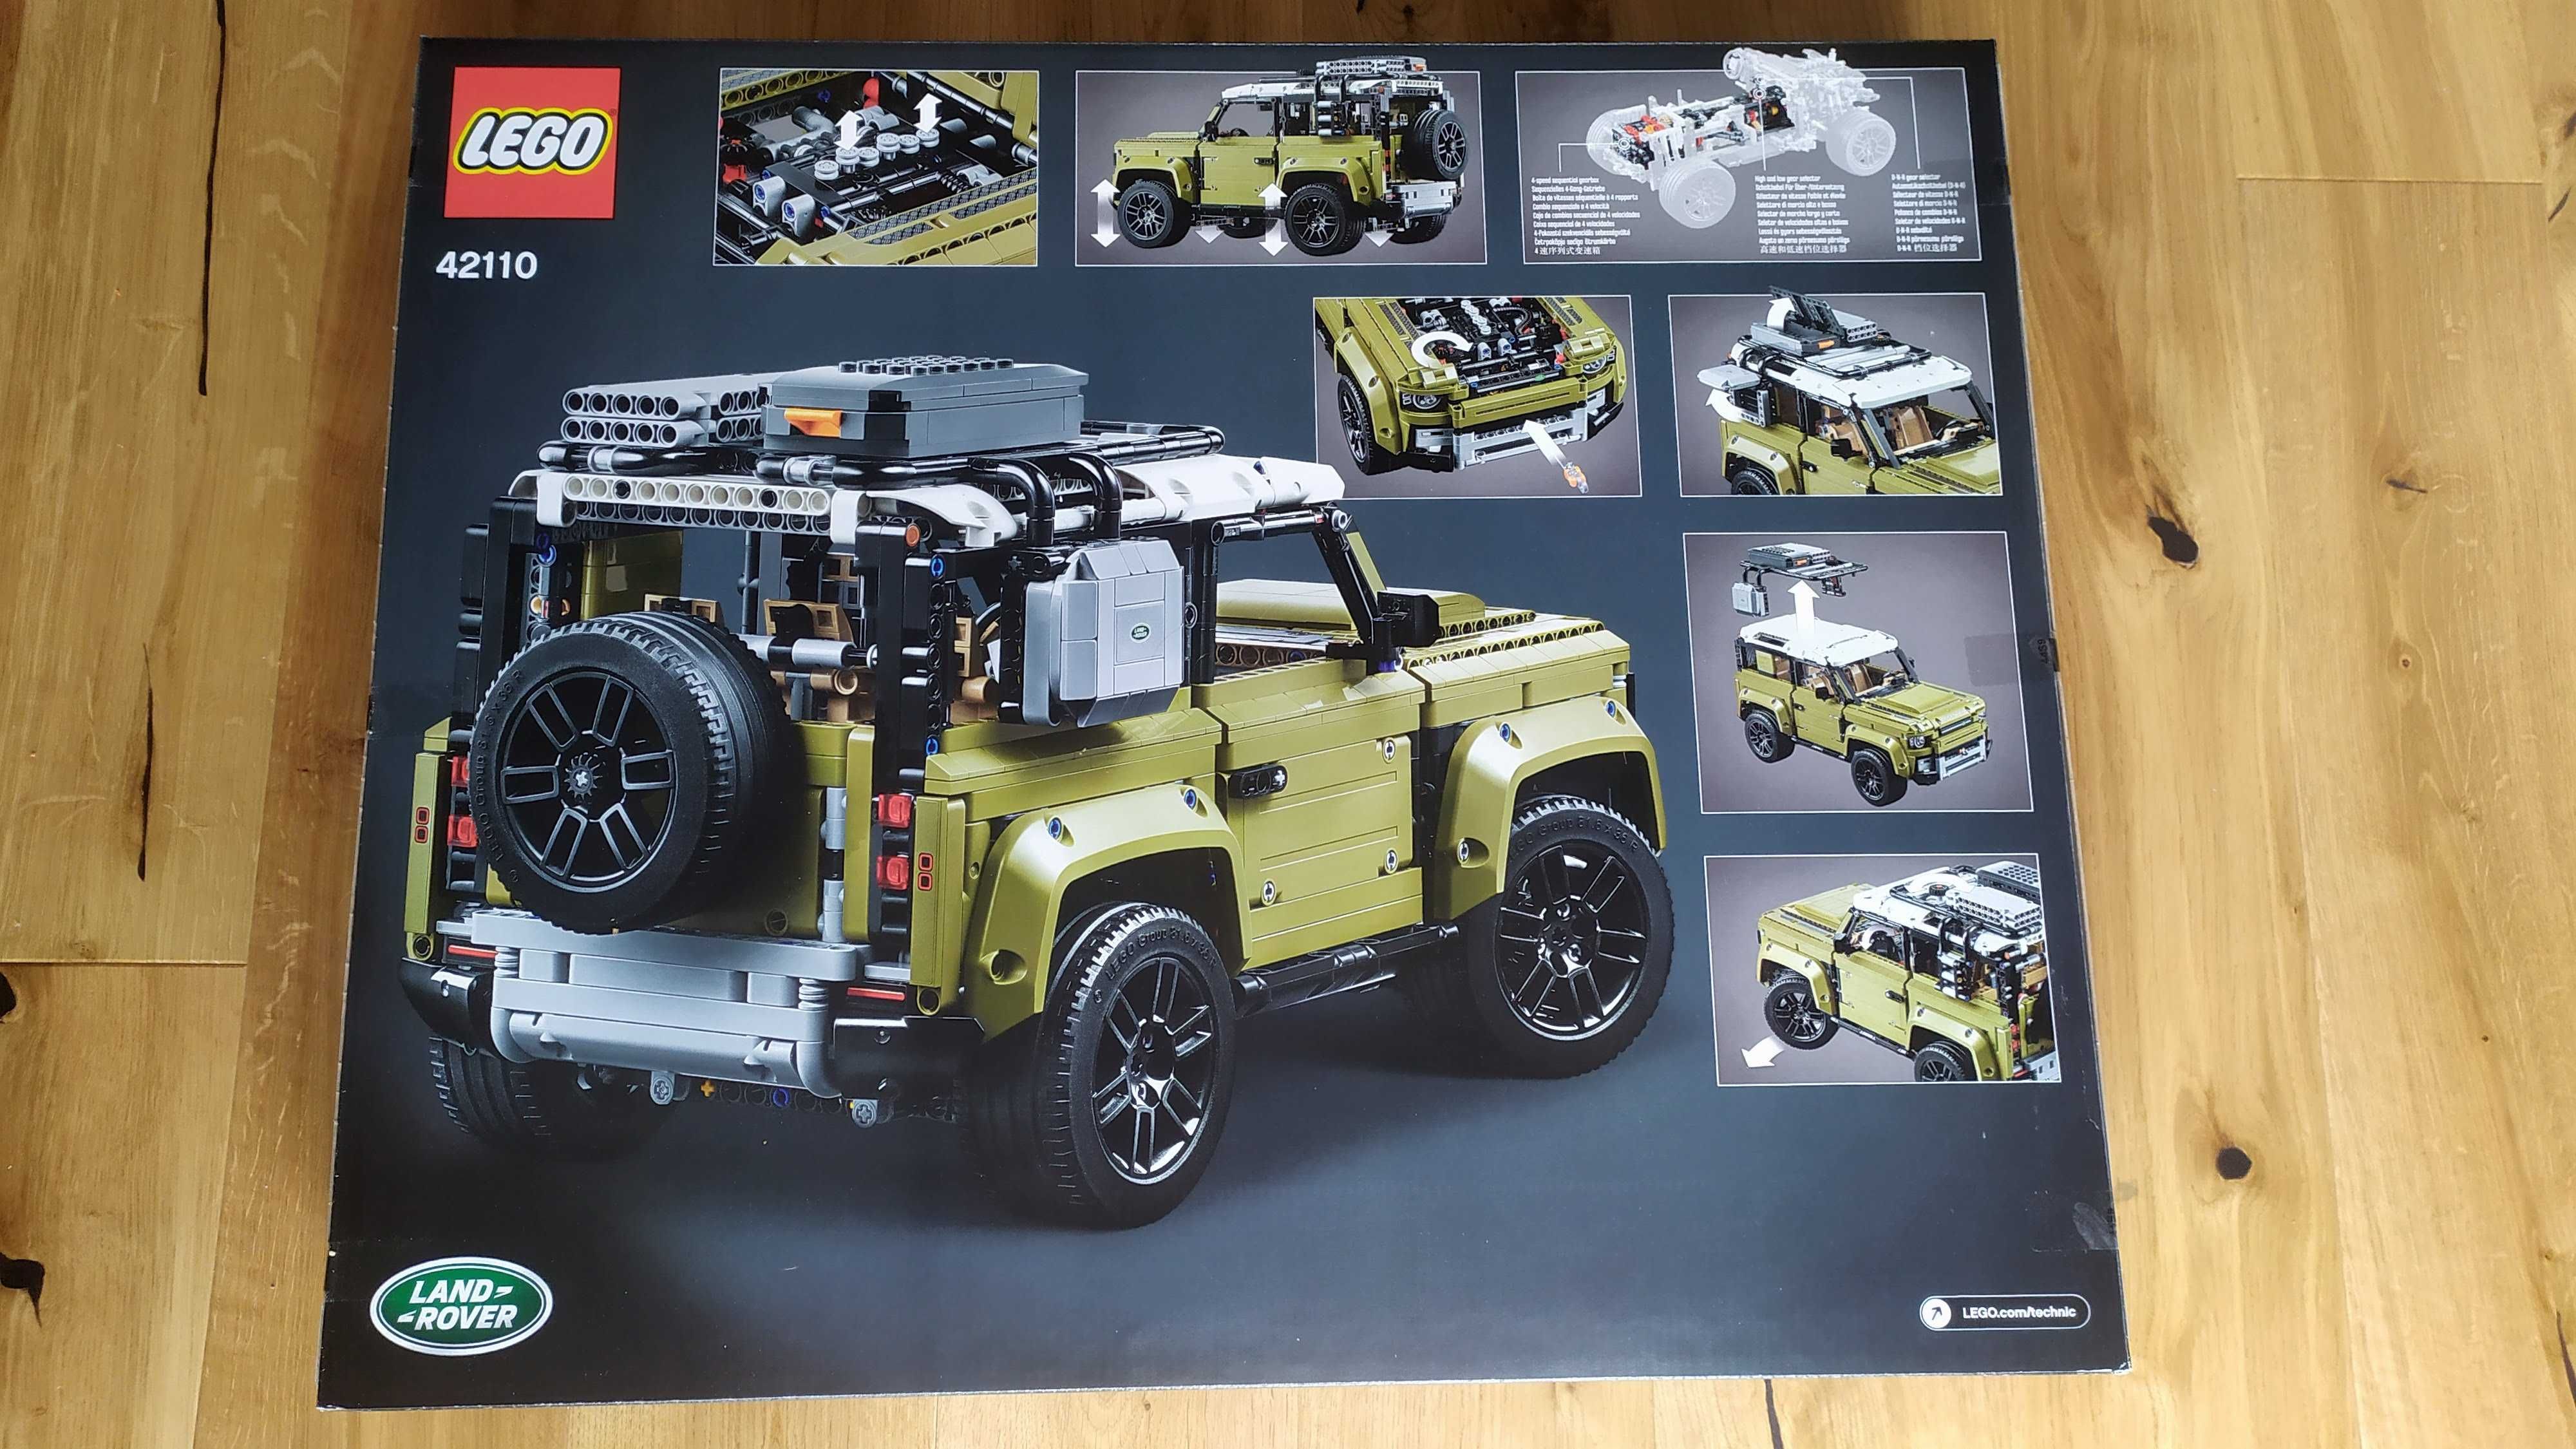 Lego Technic Land Rover Defender 42110 - Nowy, plomby producenta